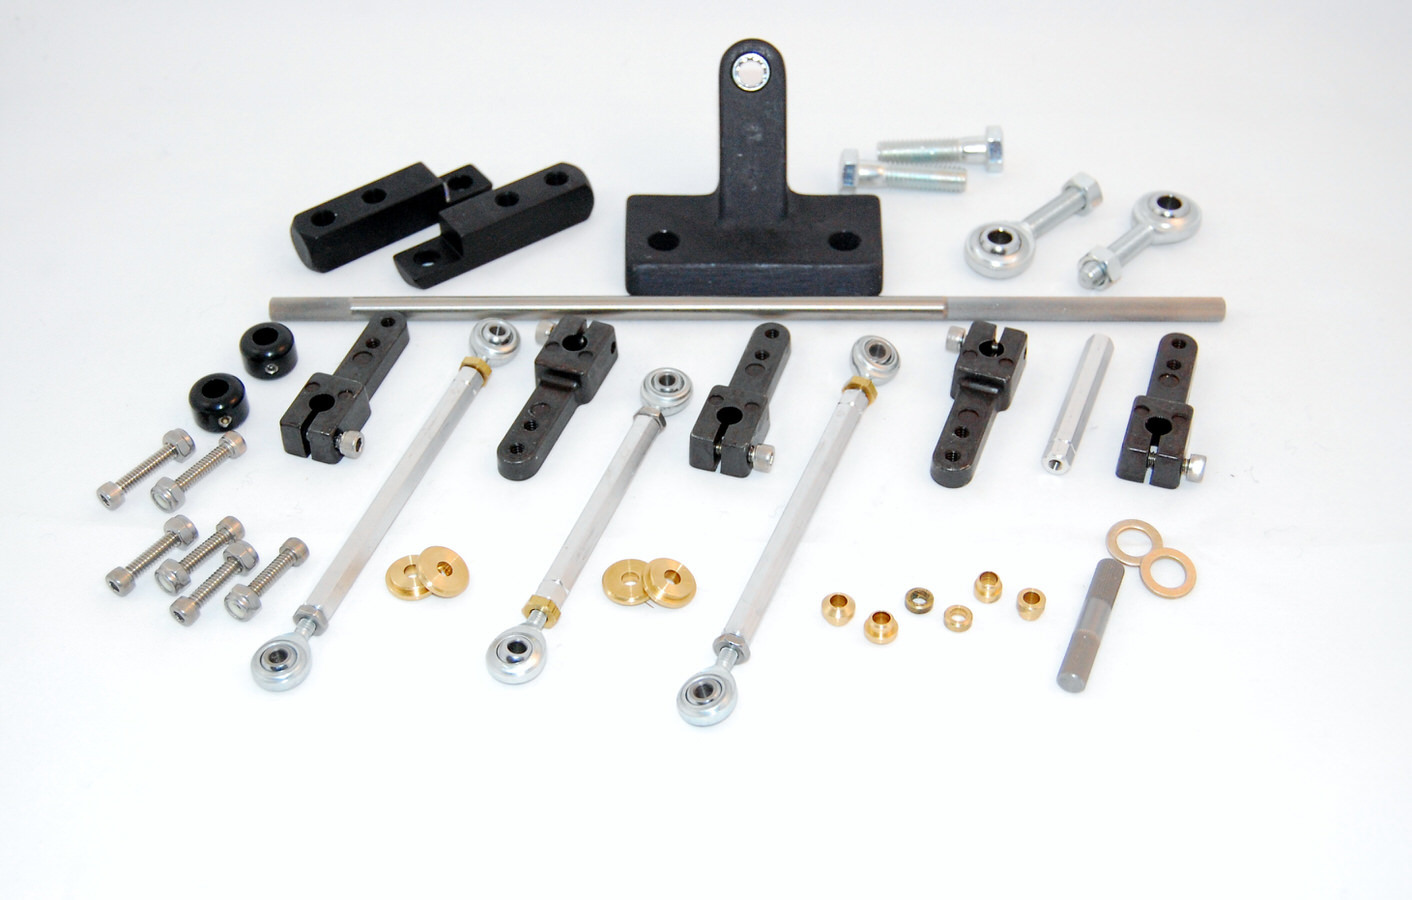 Shop for Throttle Linkage and Components :: Racecar Engineering